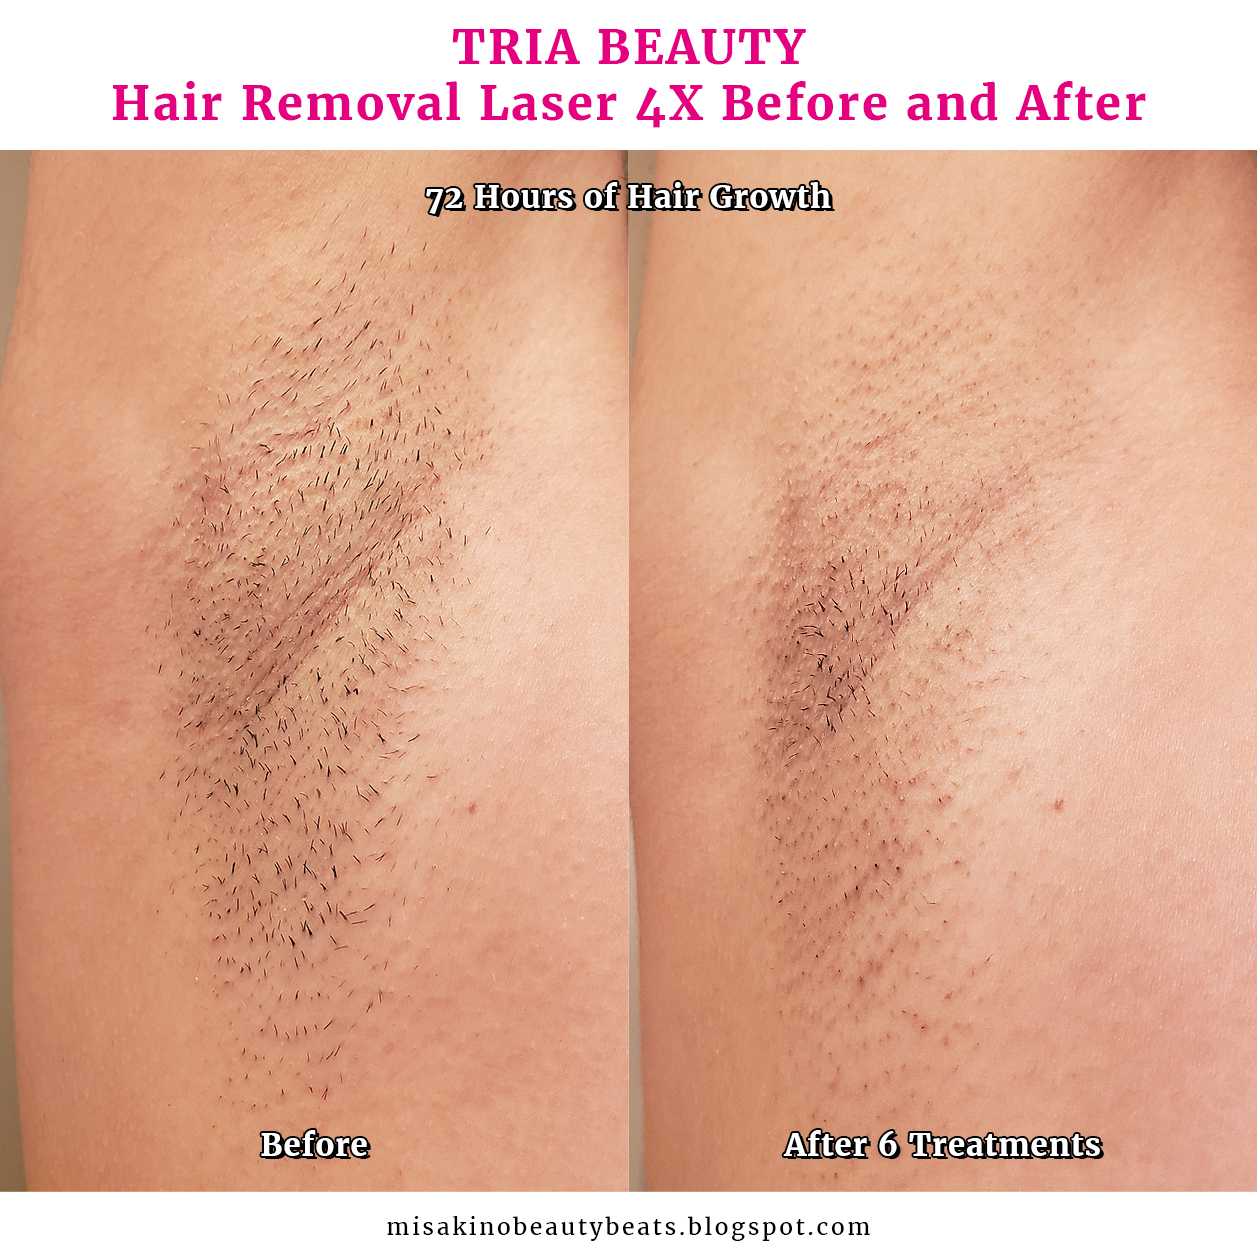 TRIA hair removal laser - ボディケア